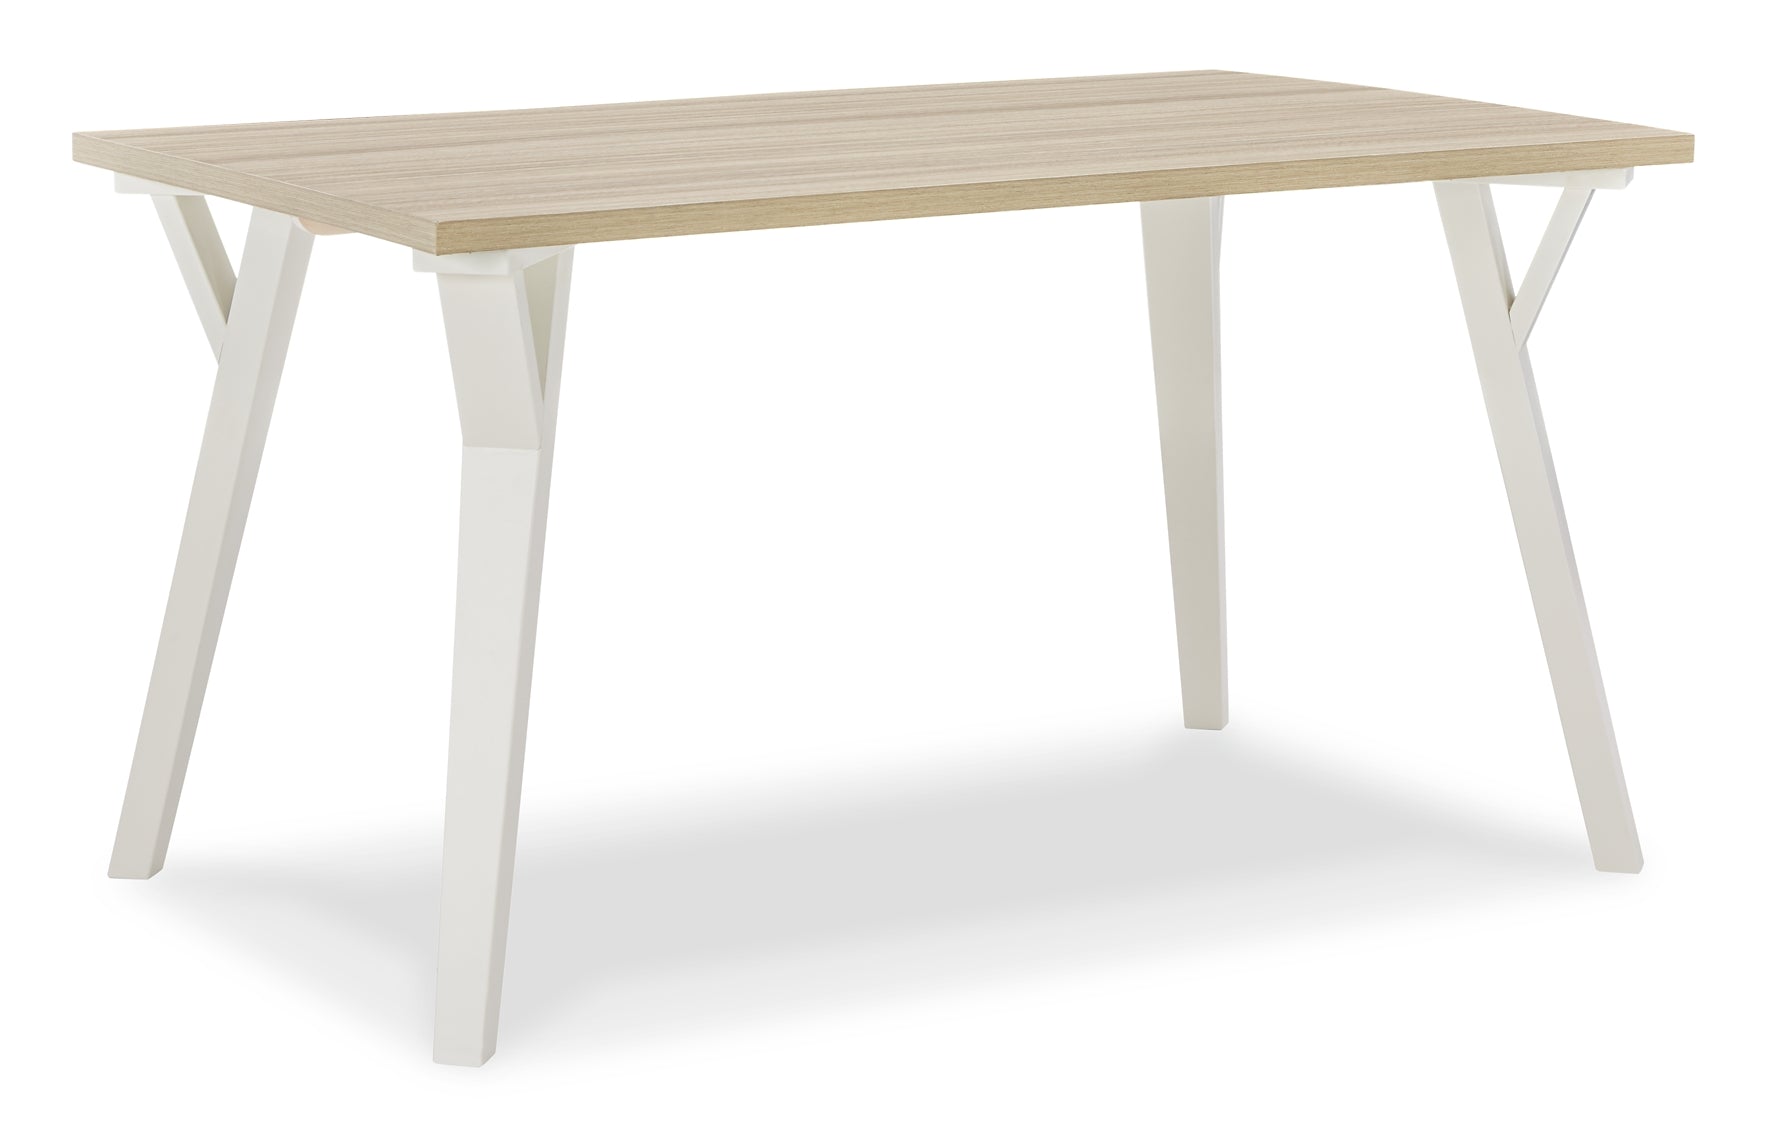 Grannen Dining Table and 4 Chairs Signature Design by Ashley®